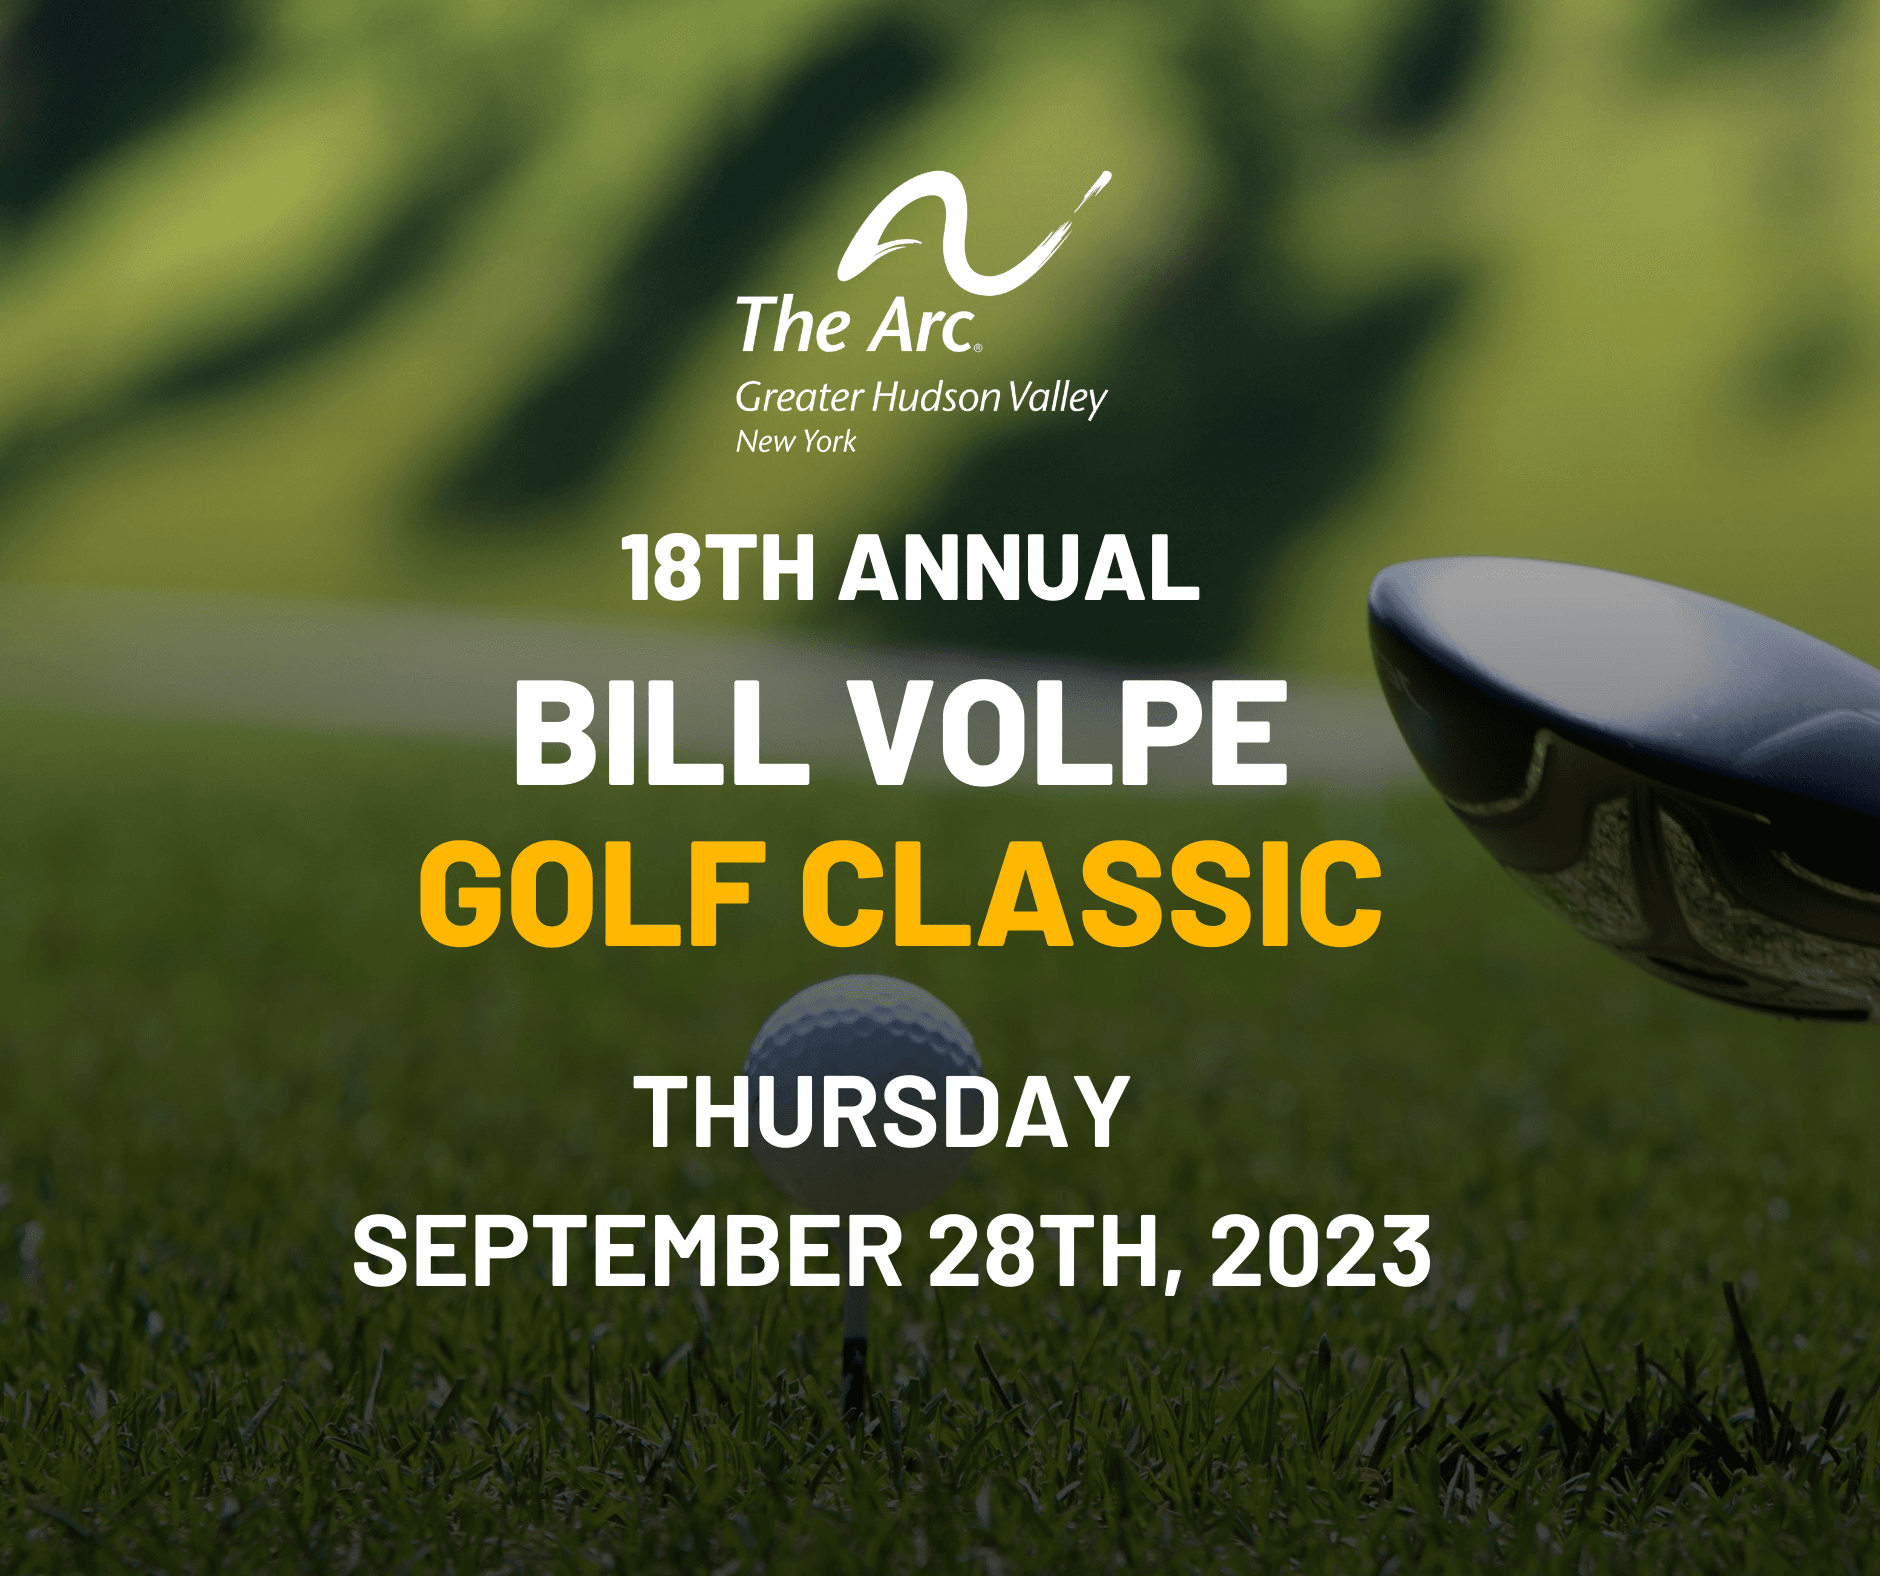 Golf For A Cause!